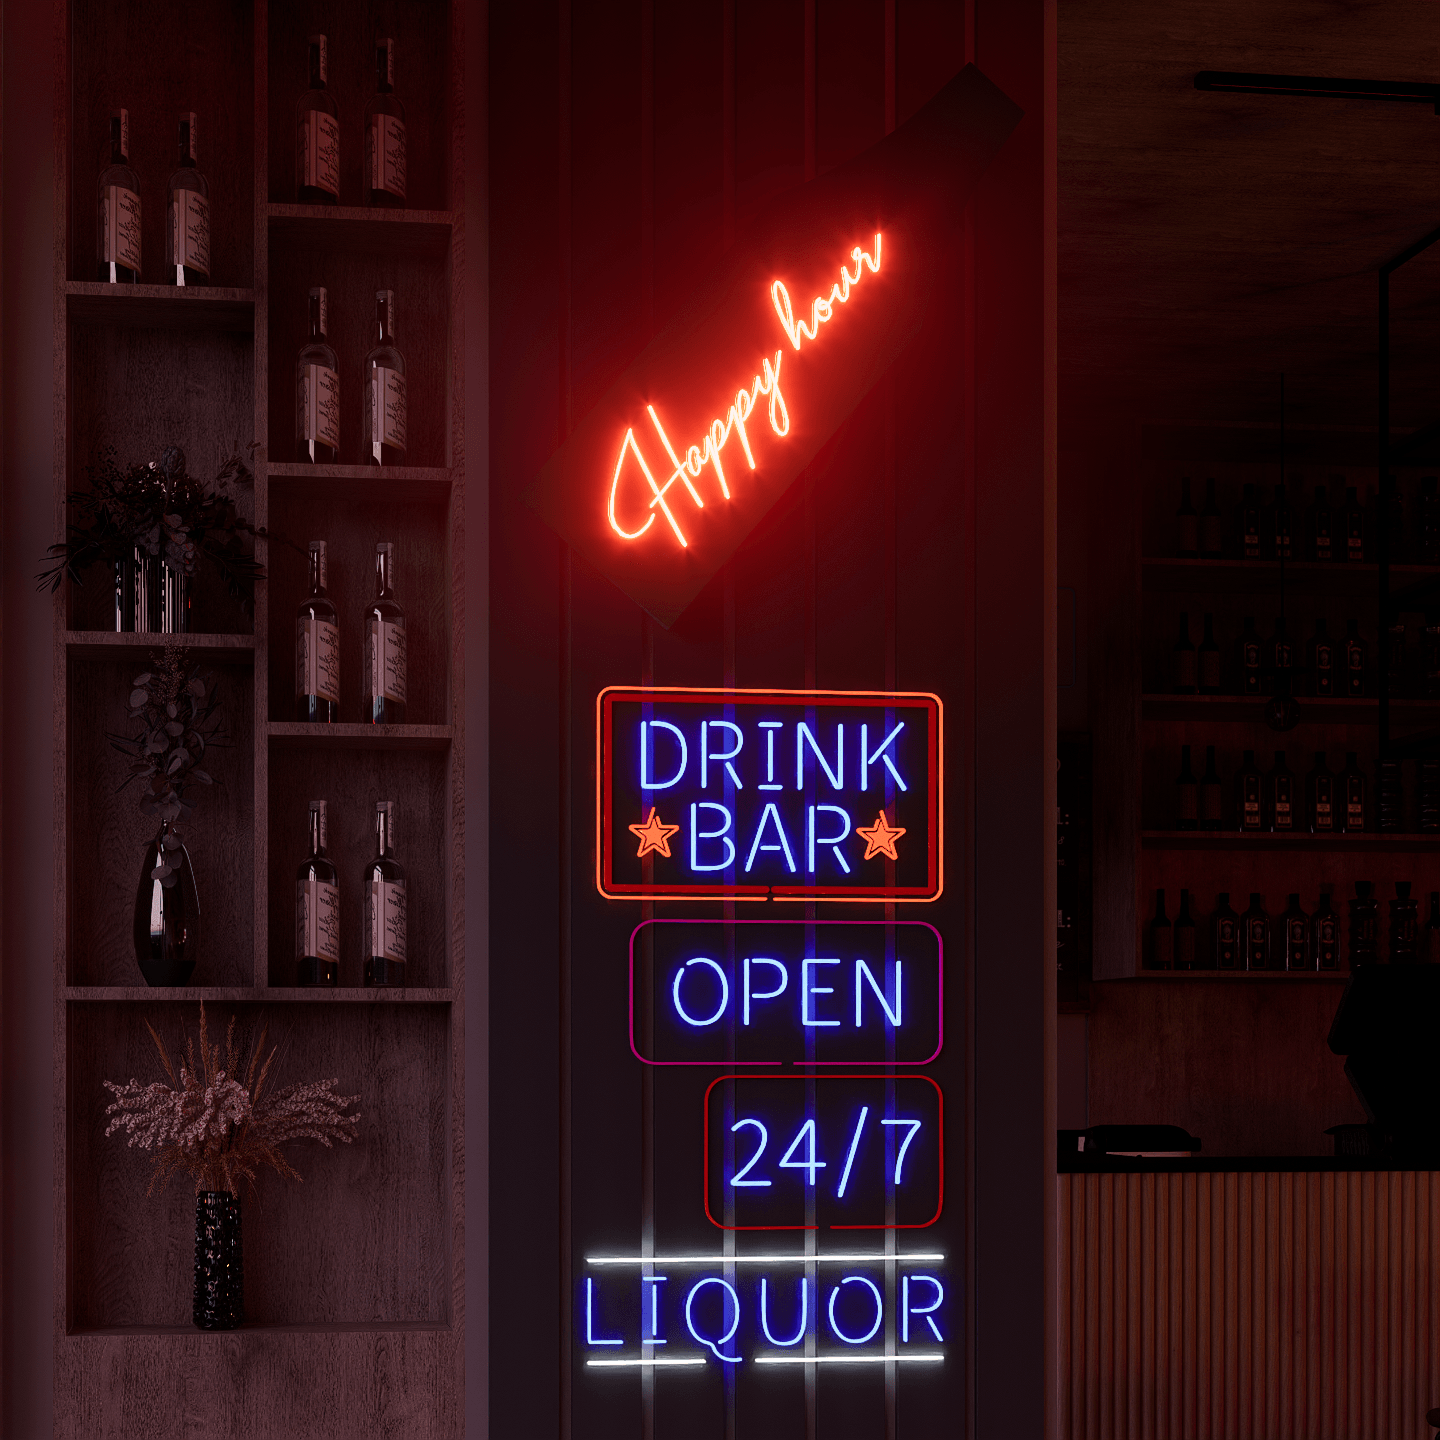 red-neon-lights-are-lit-on-the-bar-cabinet-at-night-happy-hour